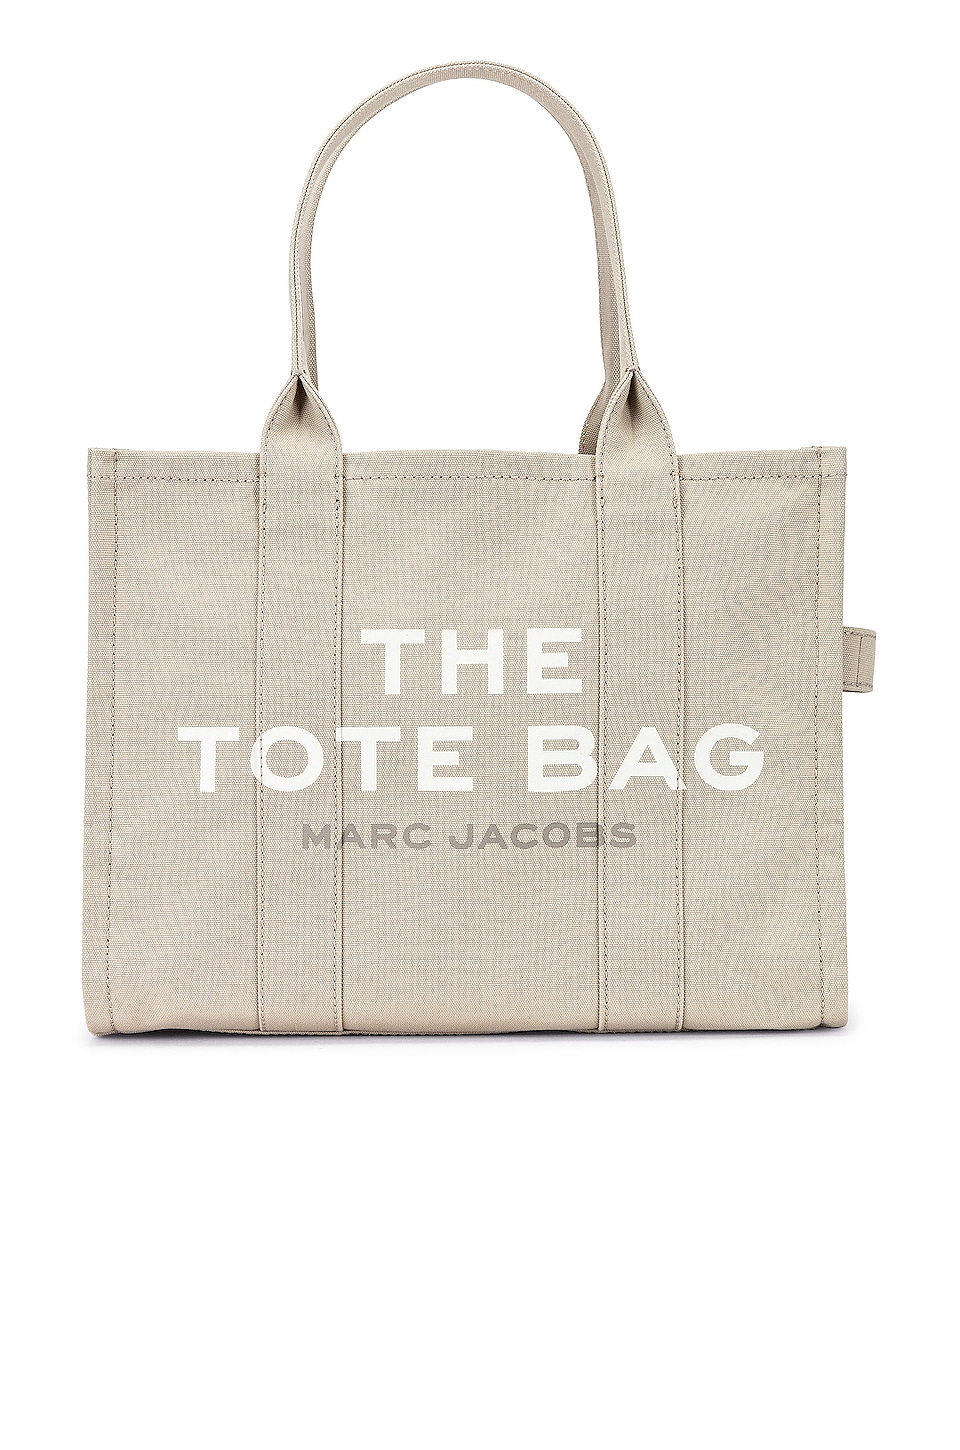 Marc Jacobs The Large Tote Bag in Beige | REVOLVE